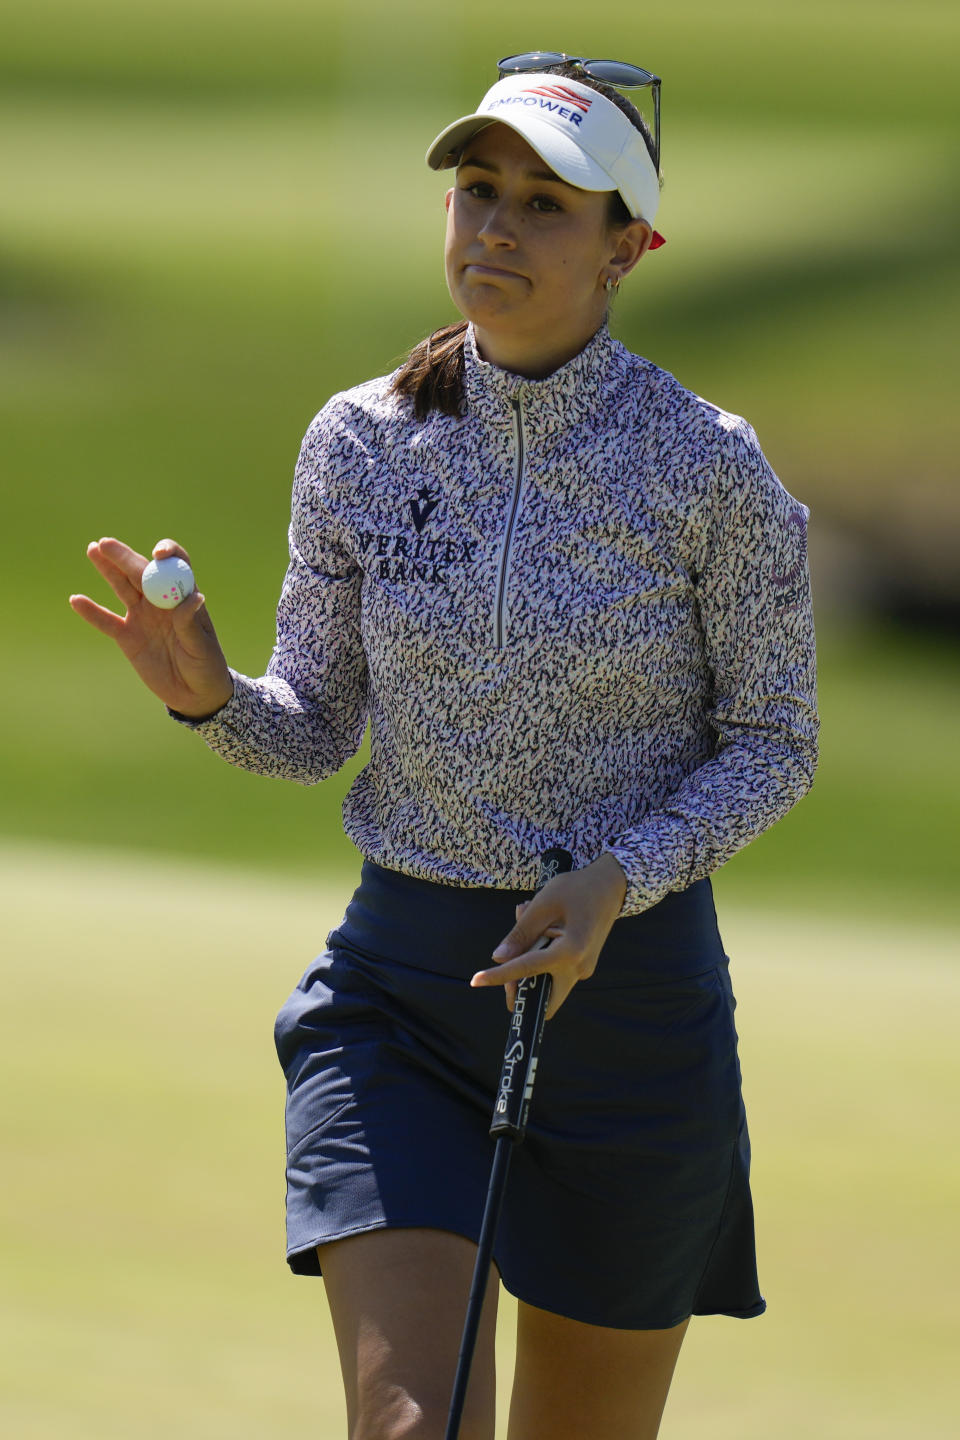 Cheyenne Knight, of the United States, reacts after sinking a putt on the second hole during the final round of the LPGA Cognizant Founders Cup golf tournament, Sunday, May 14, 2023, in Clifton, N.J. (AP Photo/Seth Wenig)